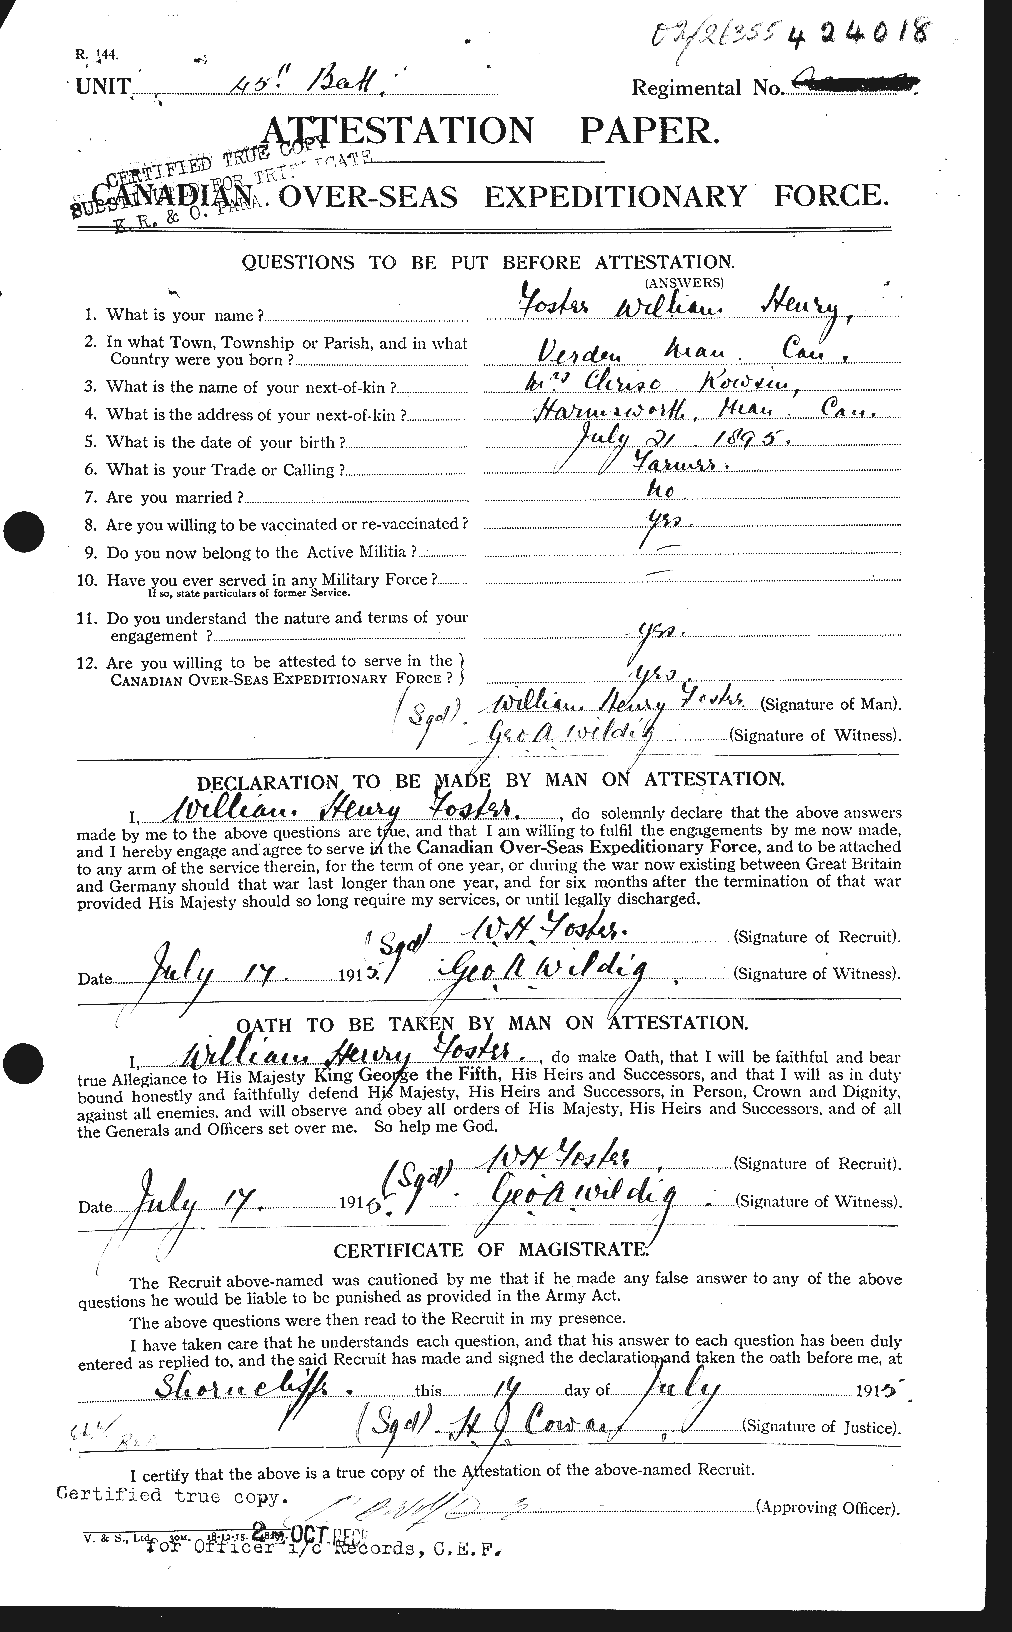 Personnel Records of the First World War - CEF 328756a